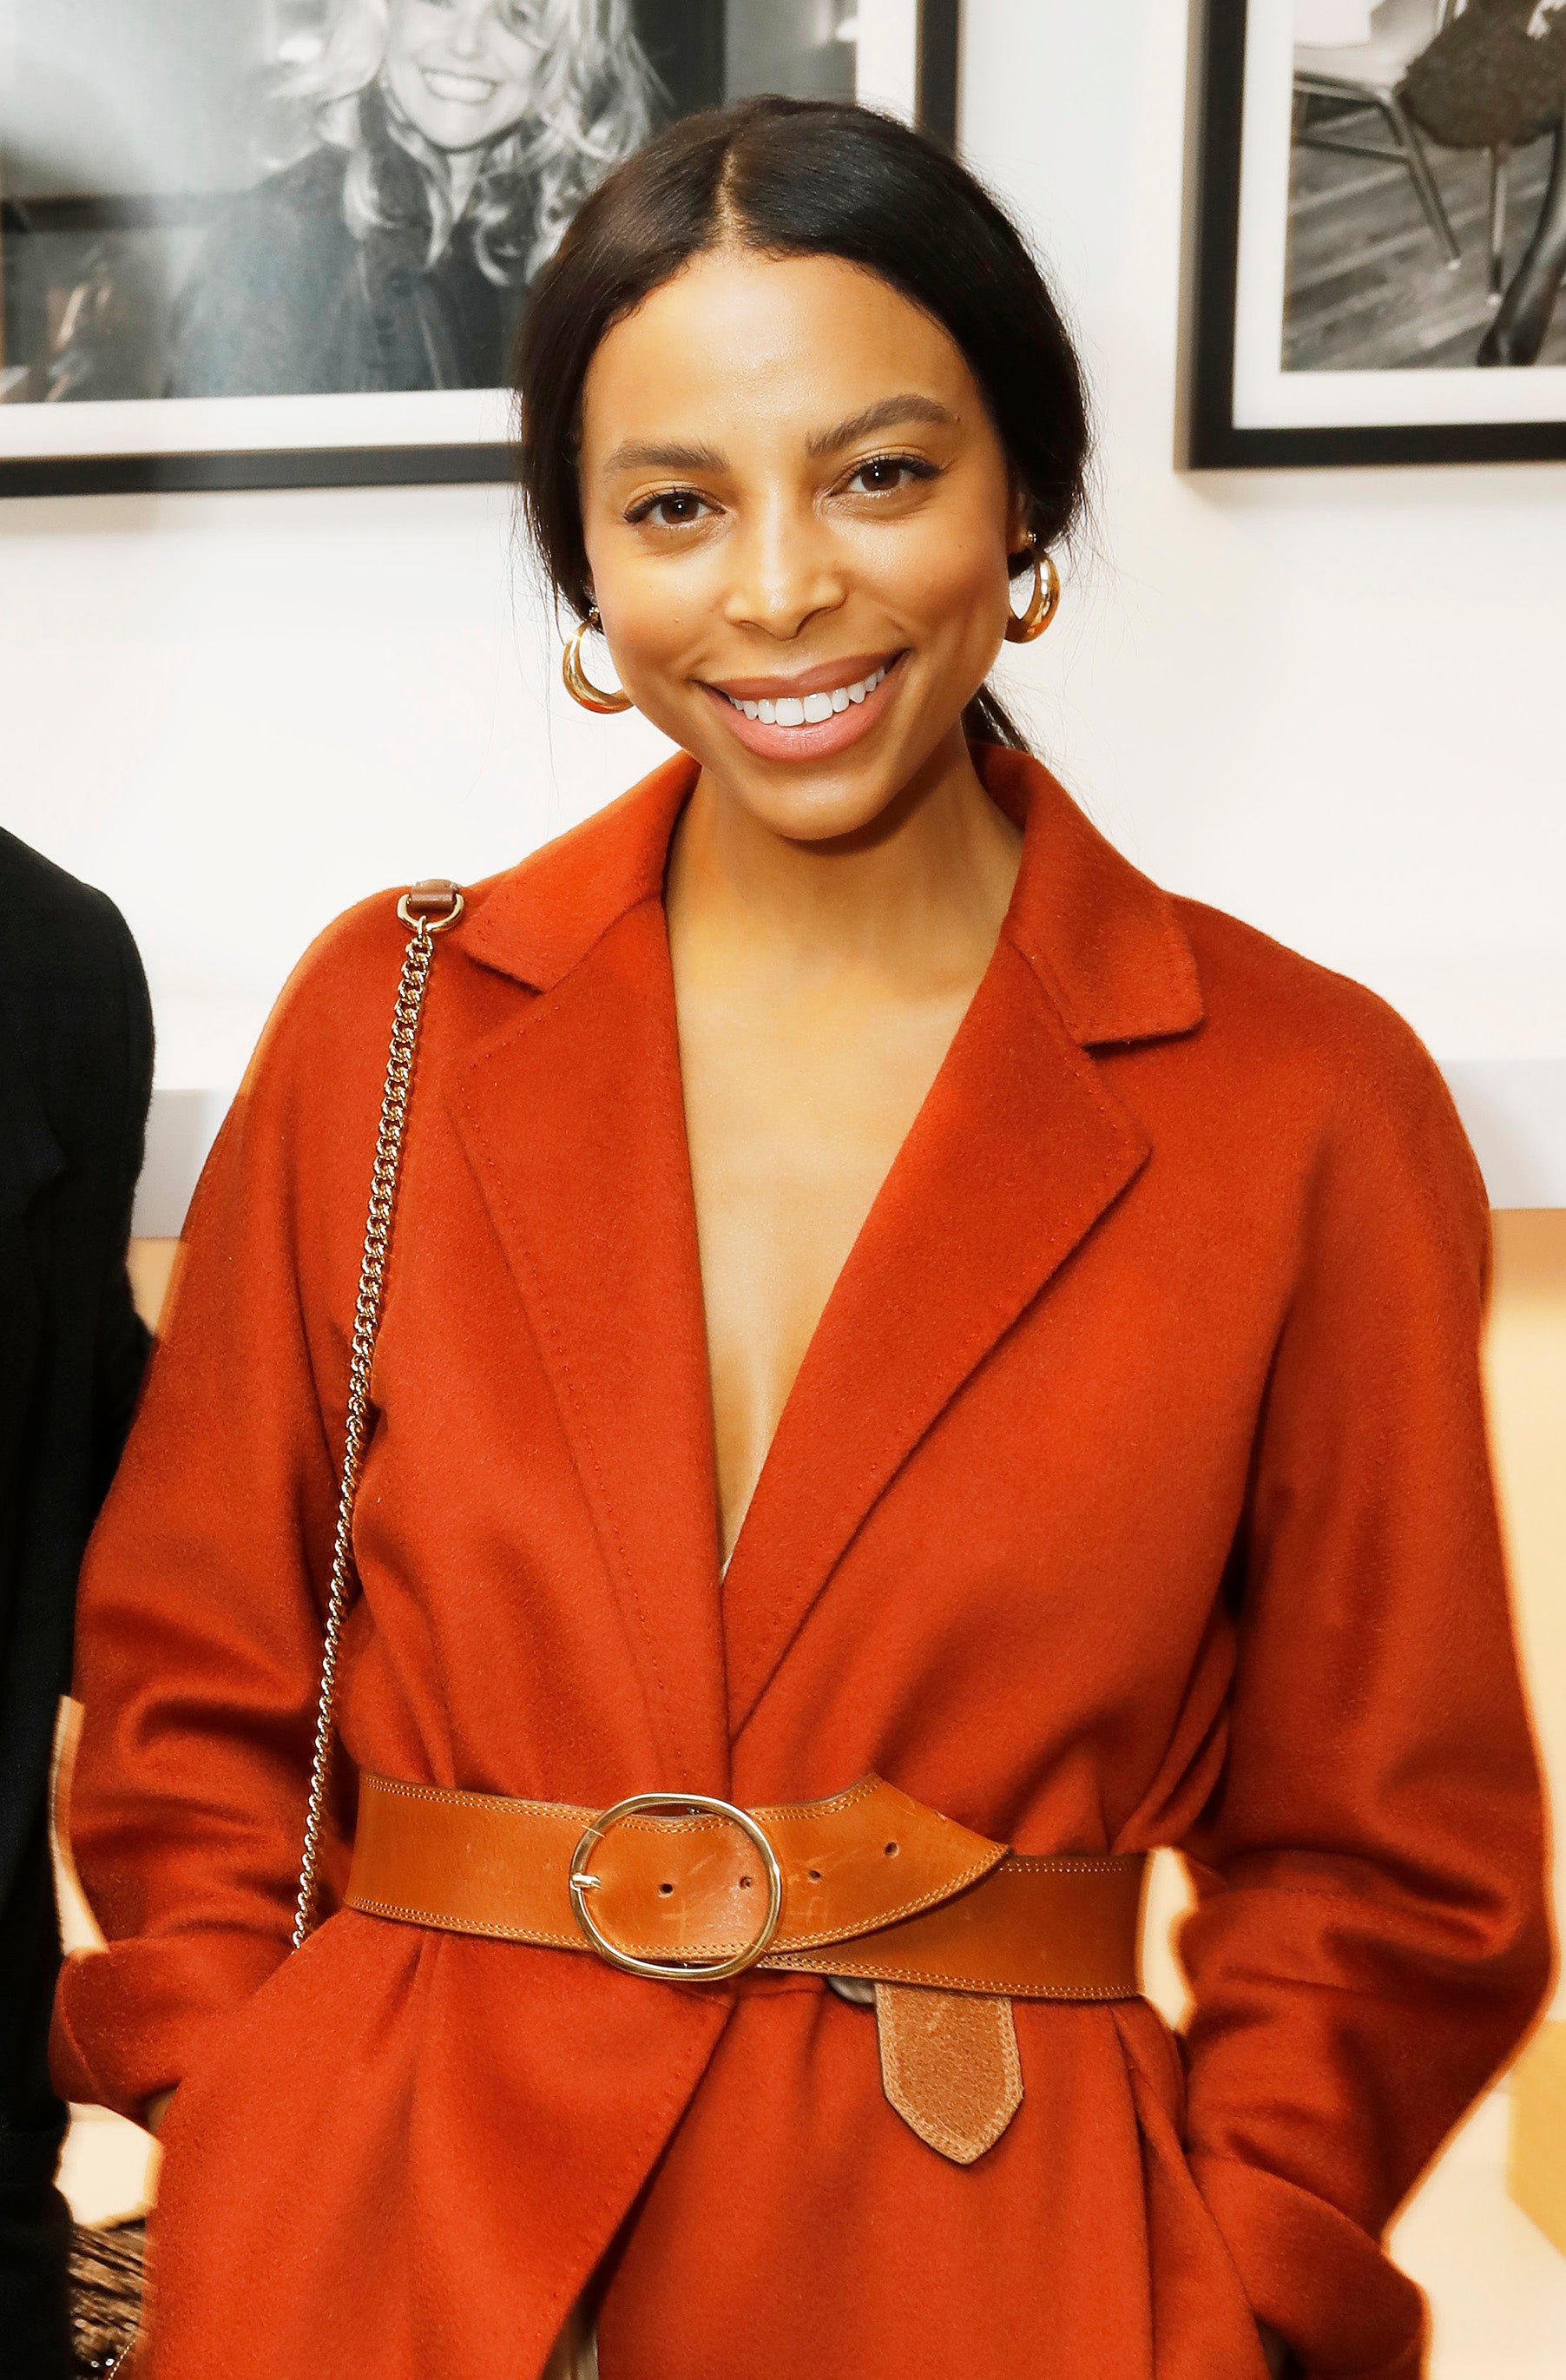 Naomie Harris, Iman, Eddie Murphy, And More Celebs Out and About